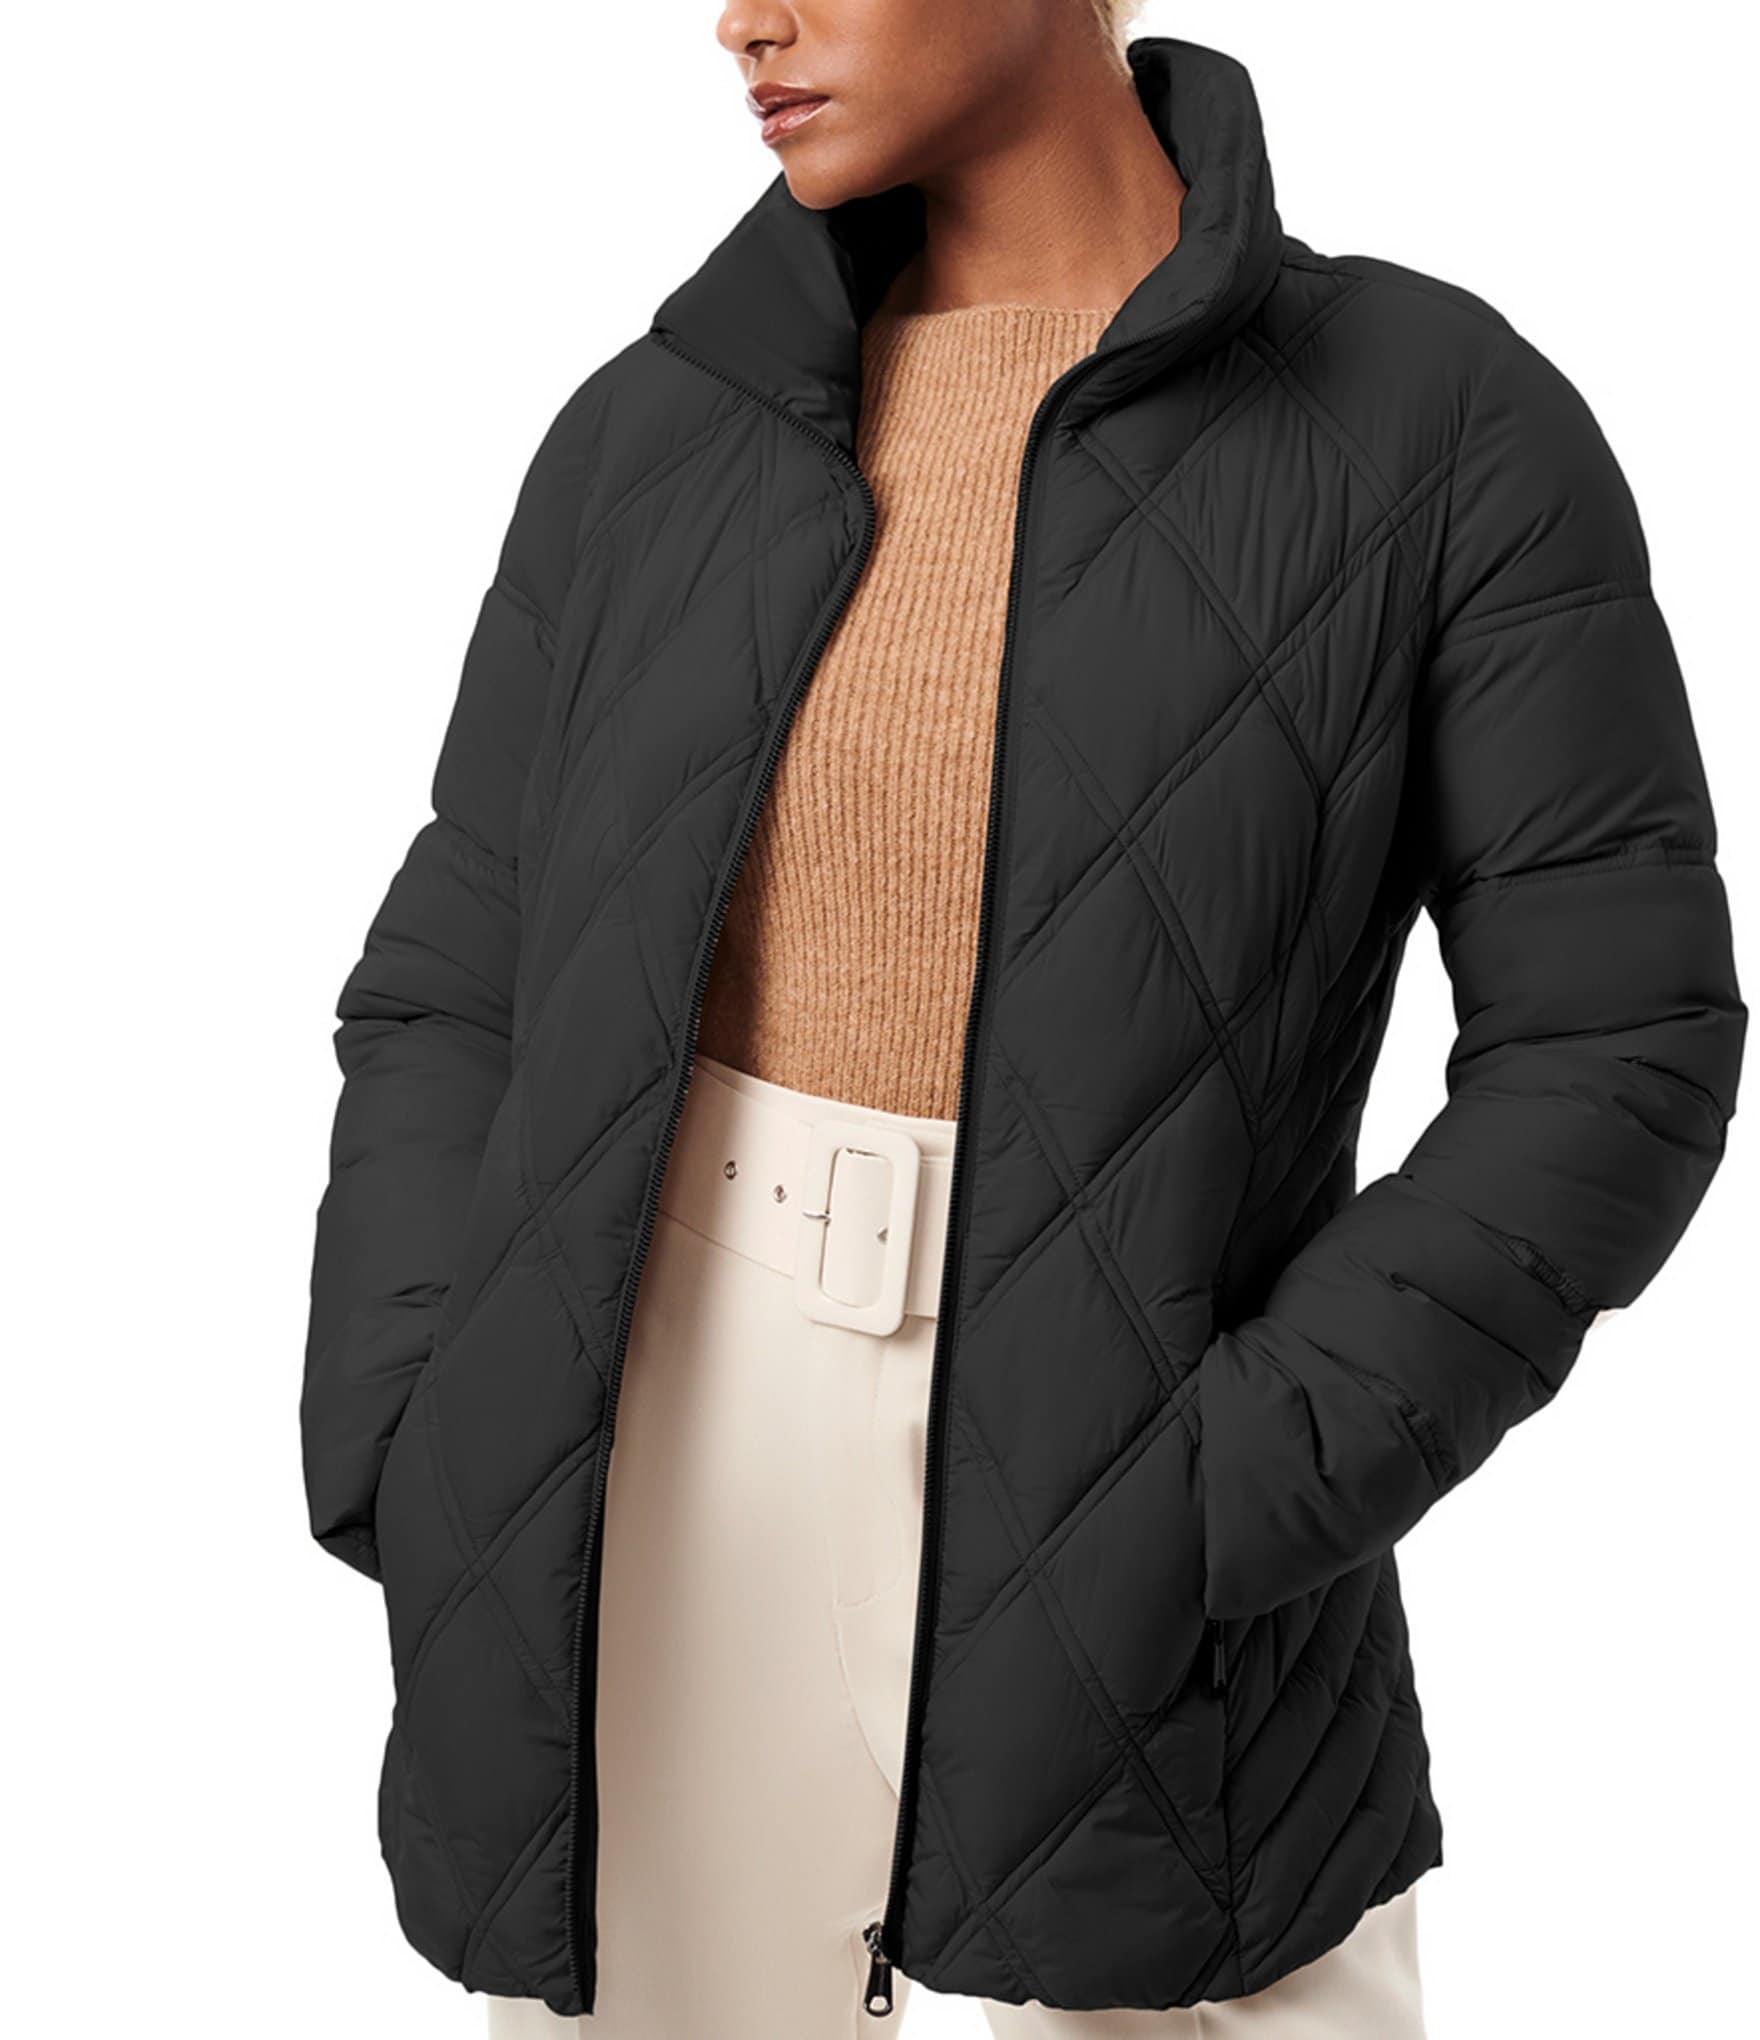 CALIA Women's Quilted Liner Jacket